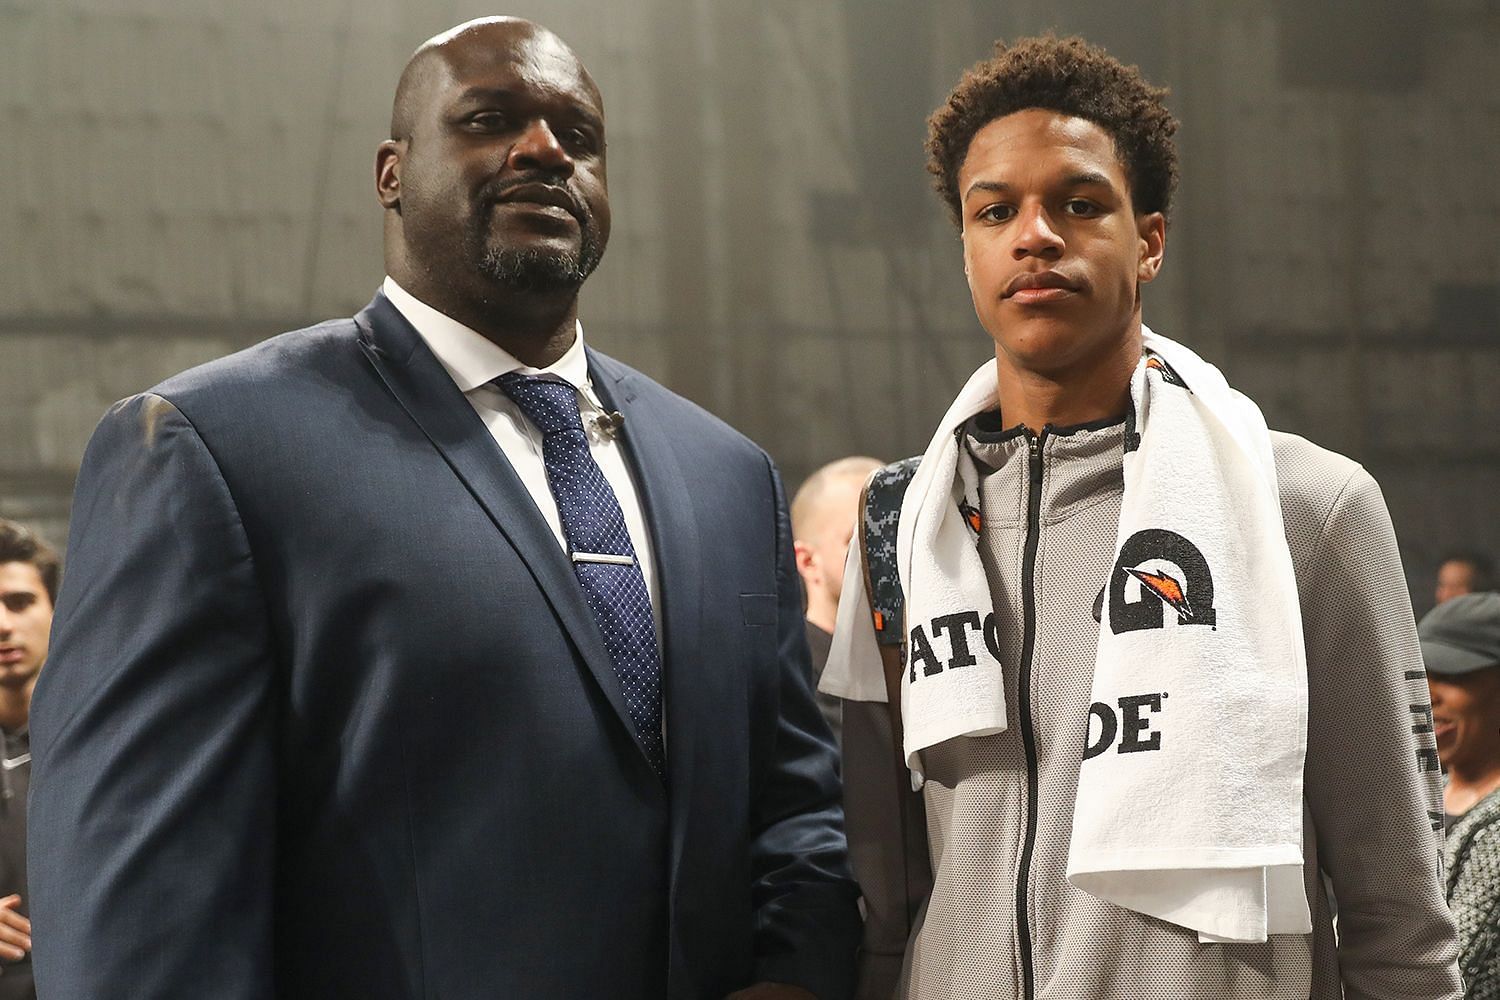 NBA champ offers tough critique of Shaq's son trying to break into